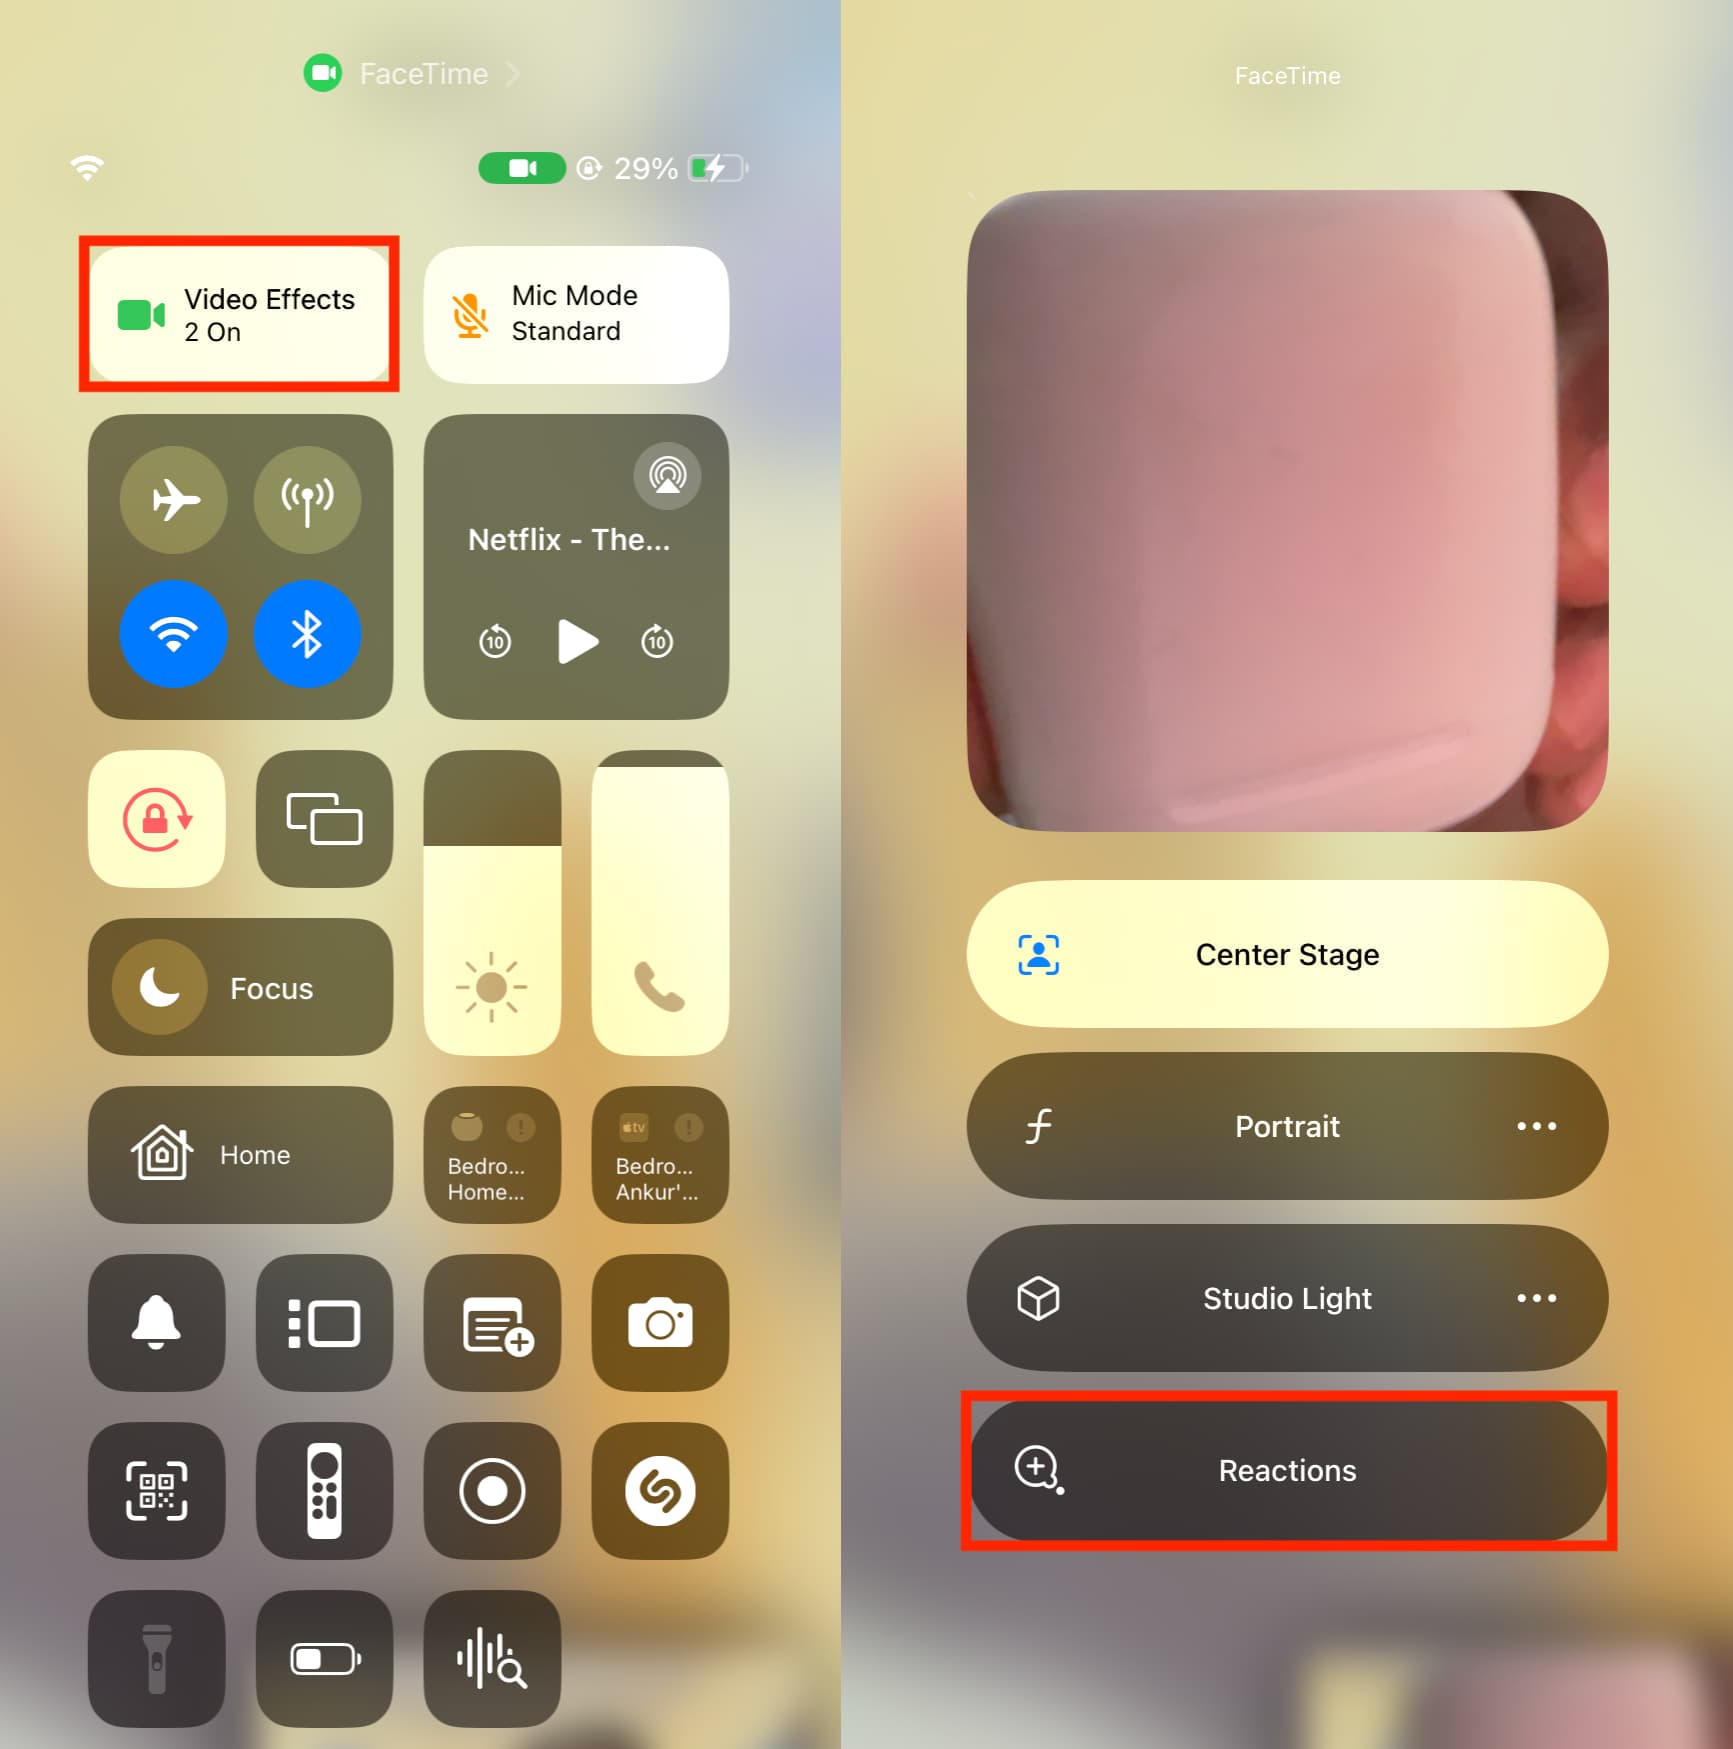 Turn off FaceTime reactions from iOS Control Center